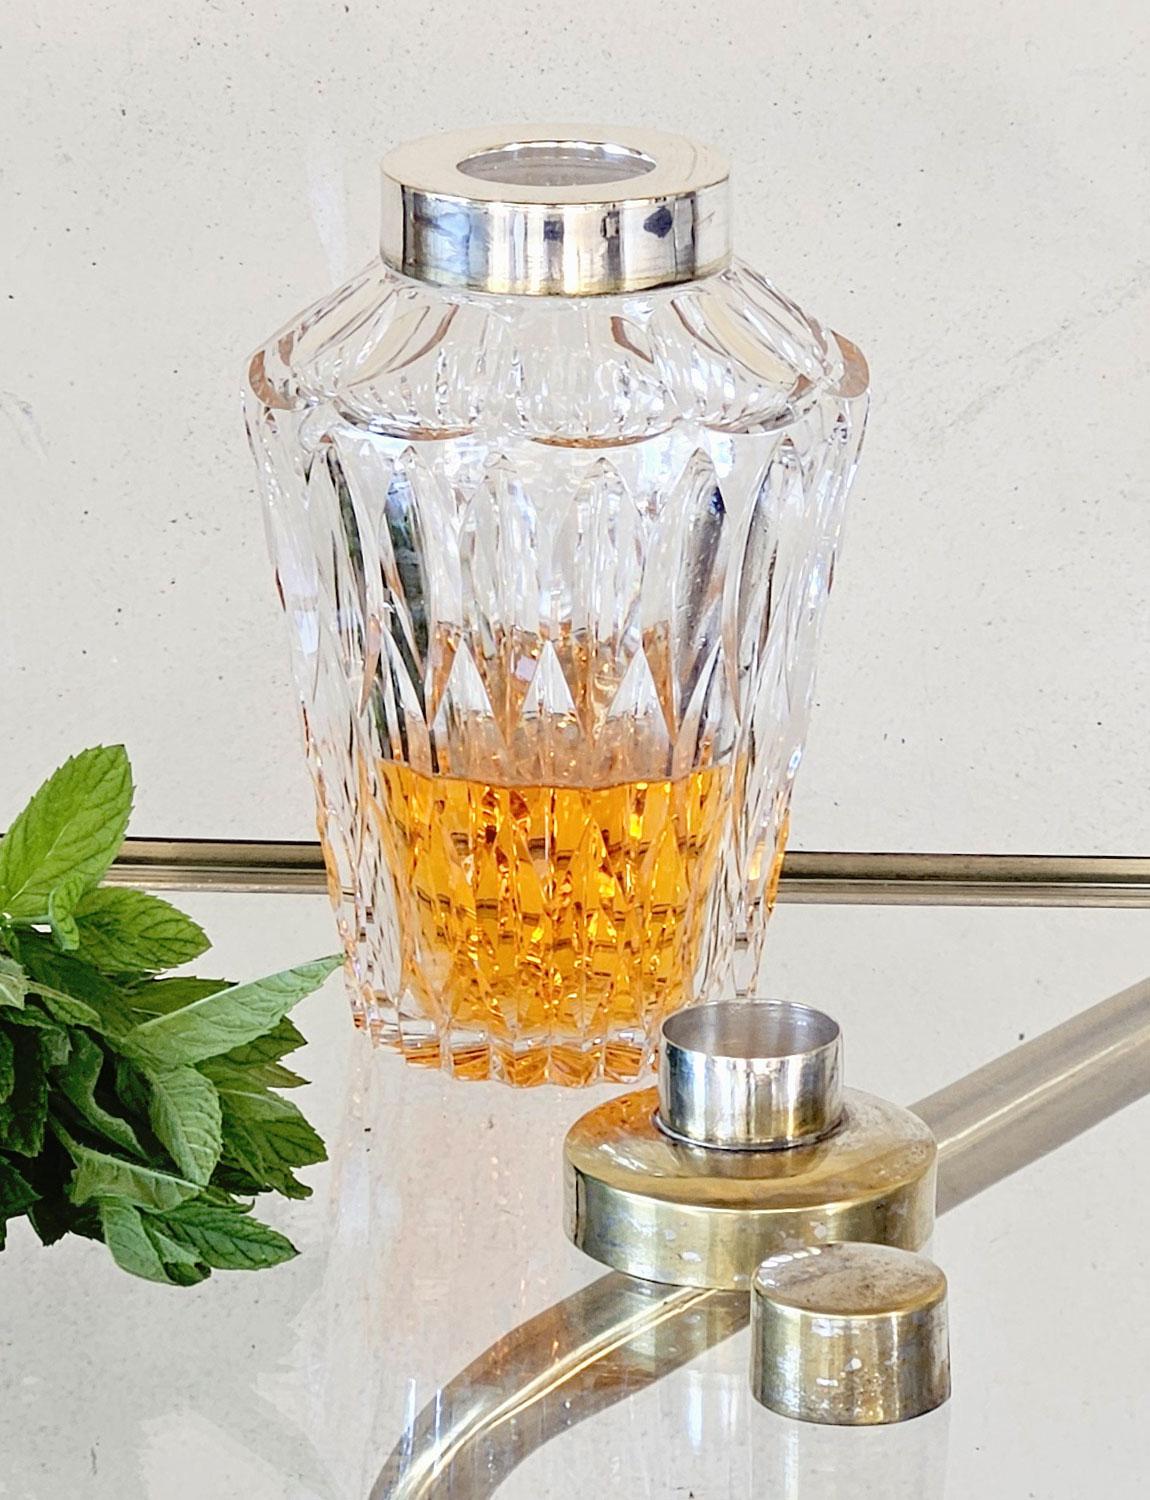 A very elegant cut glass crystal Italian cocktail shaker made in the 1950s and still in excellent condition. The shaker has a silver plated cap and sieved top for straining cocktails. A beautiful addition to a home bar.